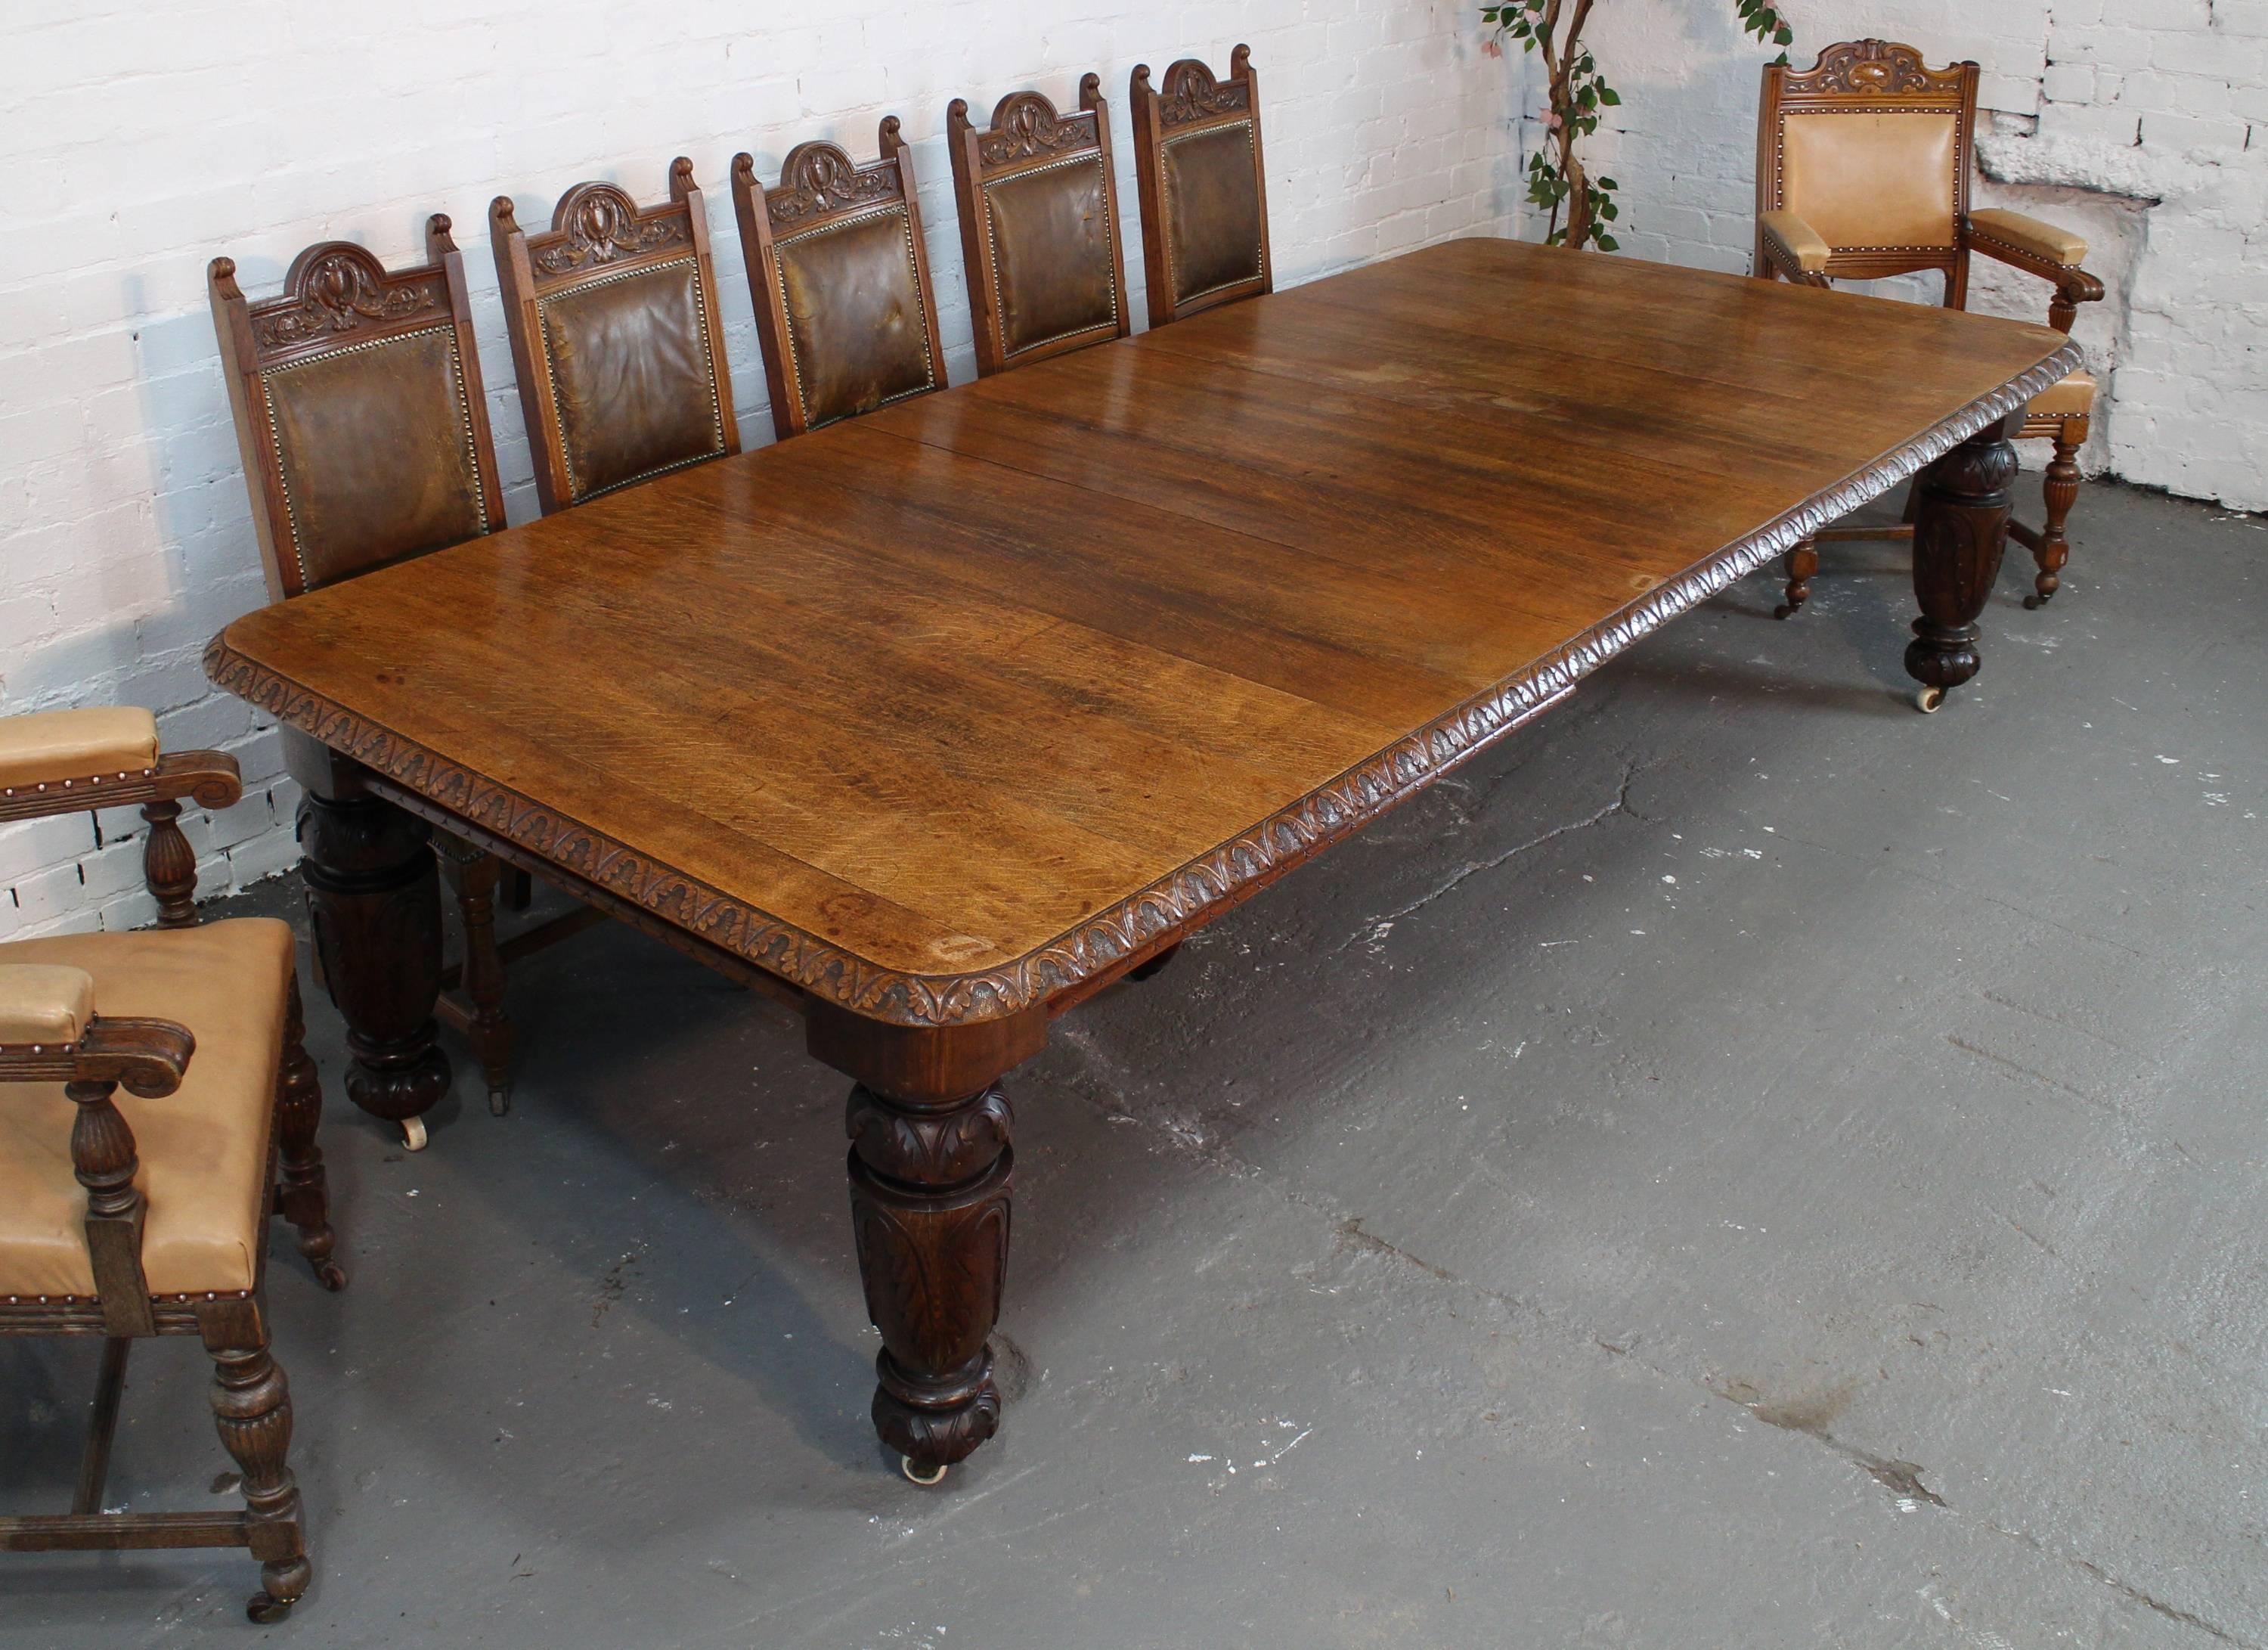 A good Victorian carved oak extending dining table featuring an acanthus leaf carved edge and legs. This 4ft 4½in wide table smoothly extends from 5ft to 9ft 9in allowing it to incorporate any combination of the three original leaves and seat up to